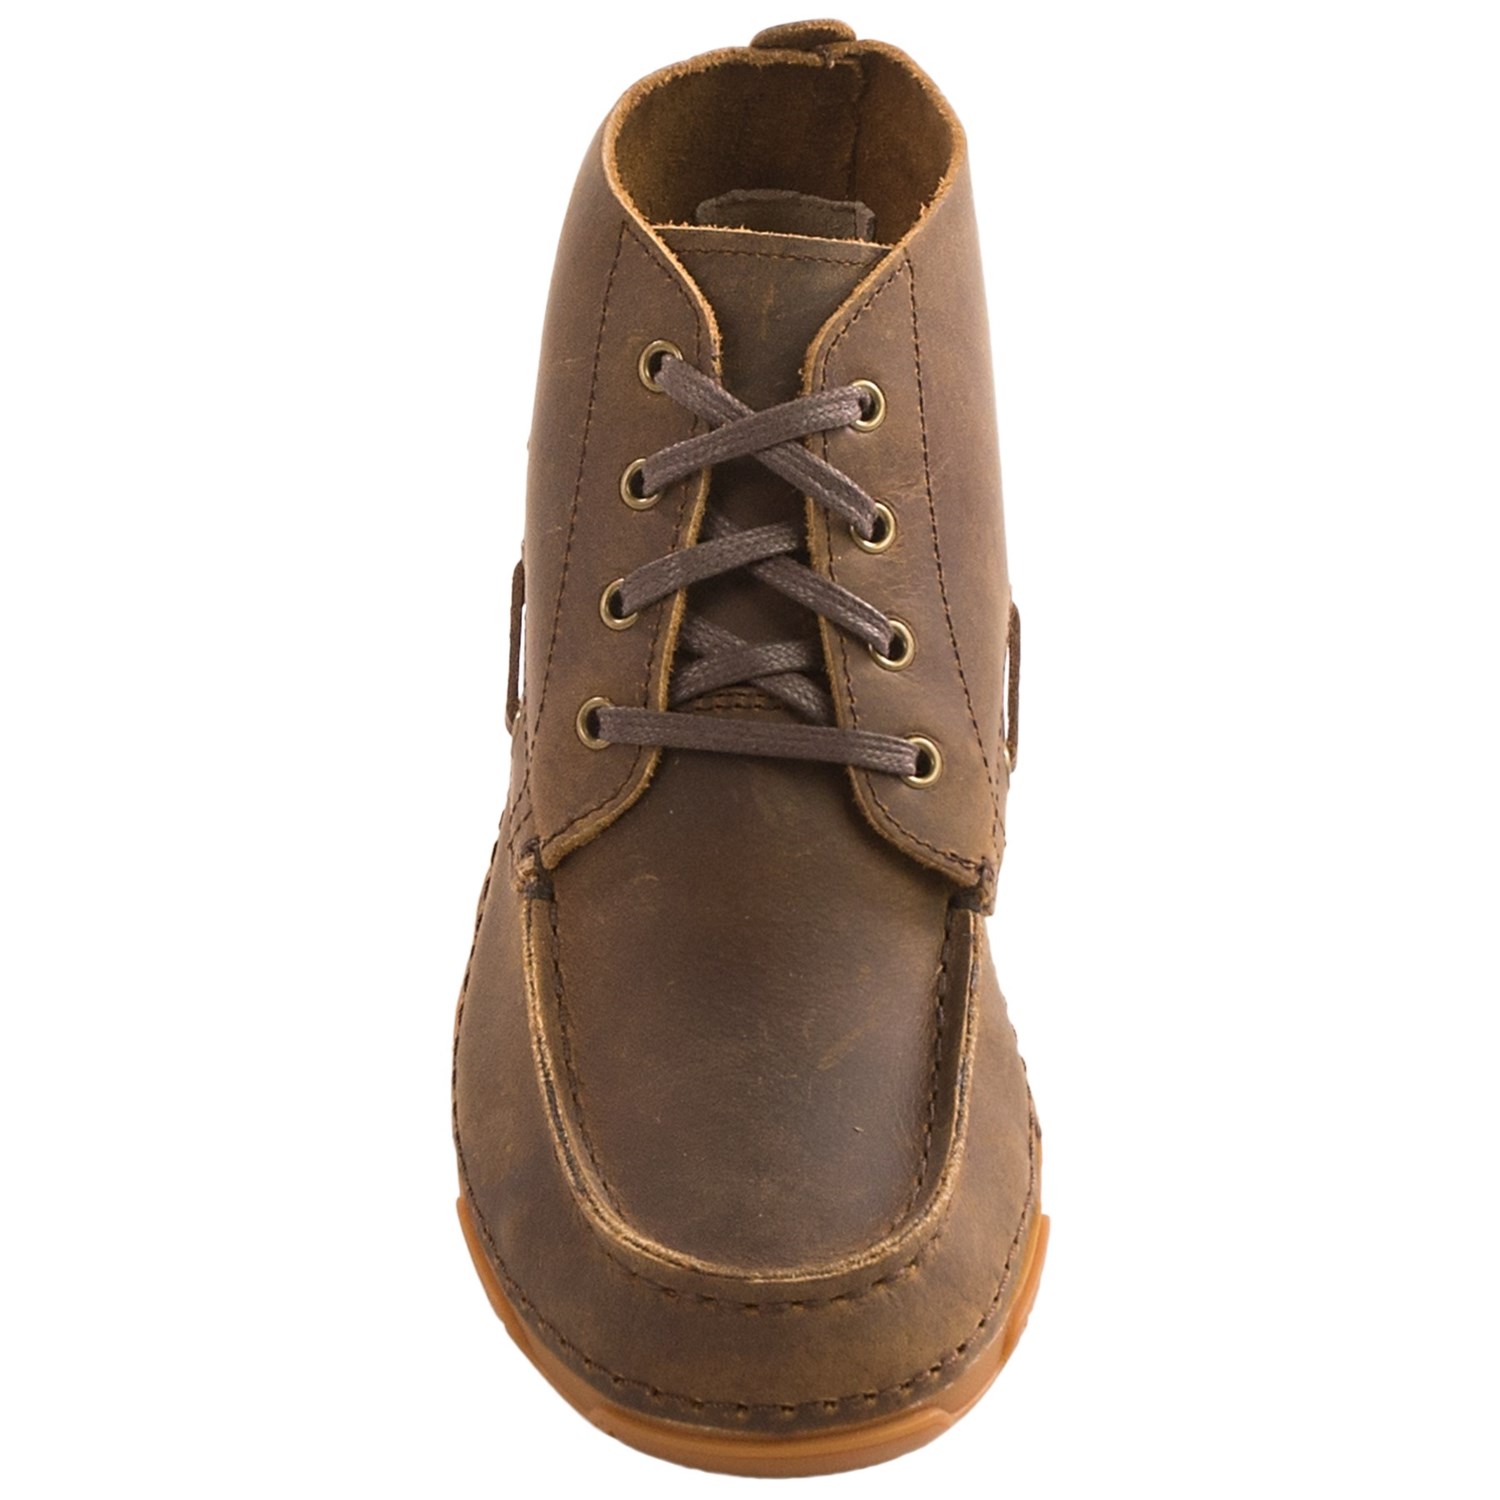 Ariat Holbrook Leather Chukka Boots (For Toddlers) 9388P - Save 74%